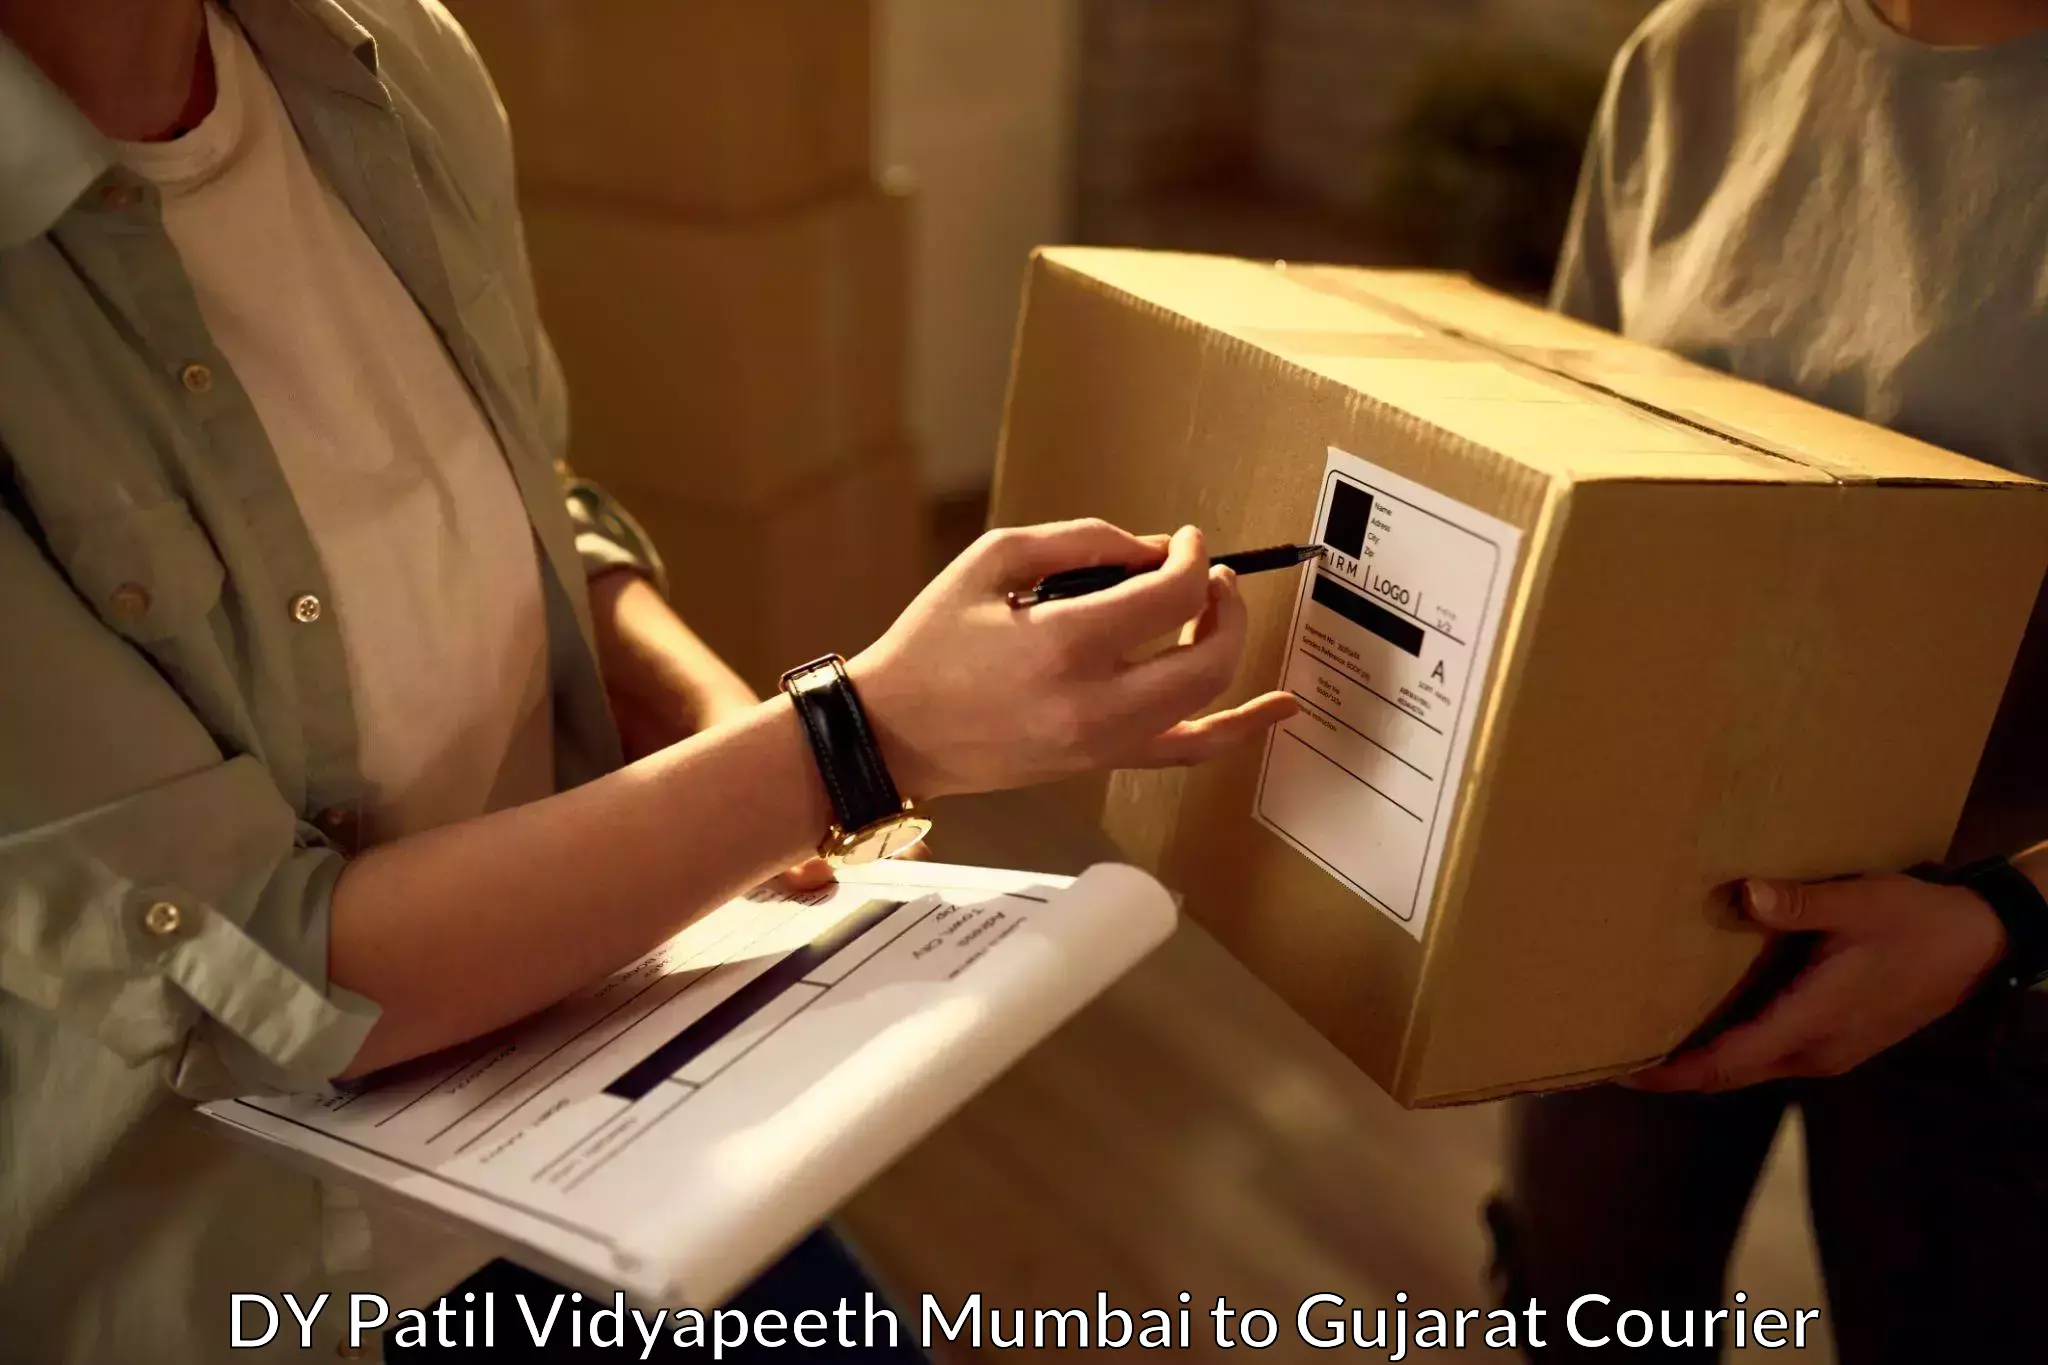 Personal courier services DY Patil Vidyapeeth Mumbai to Lunawada